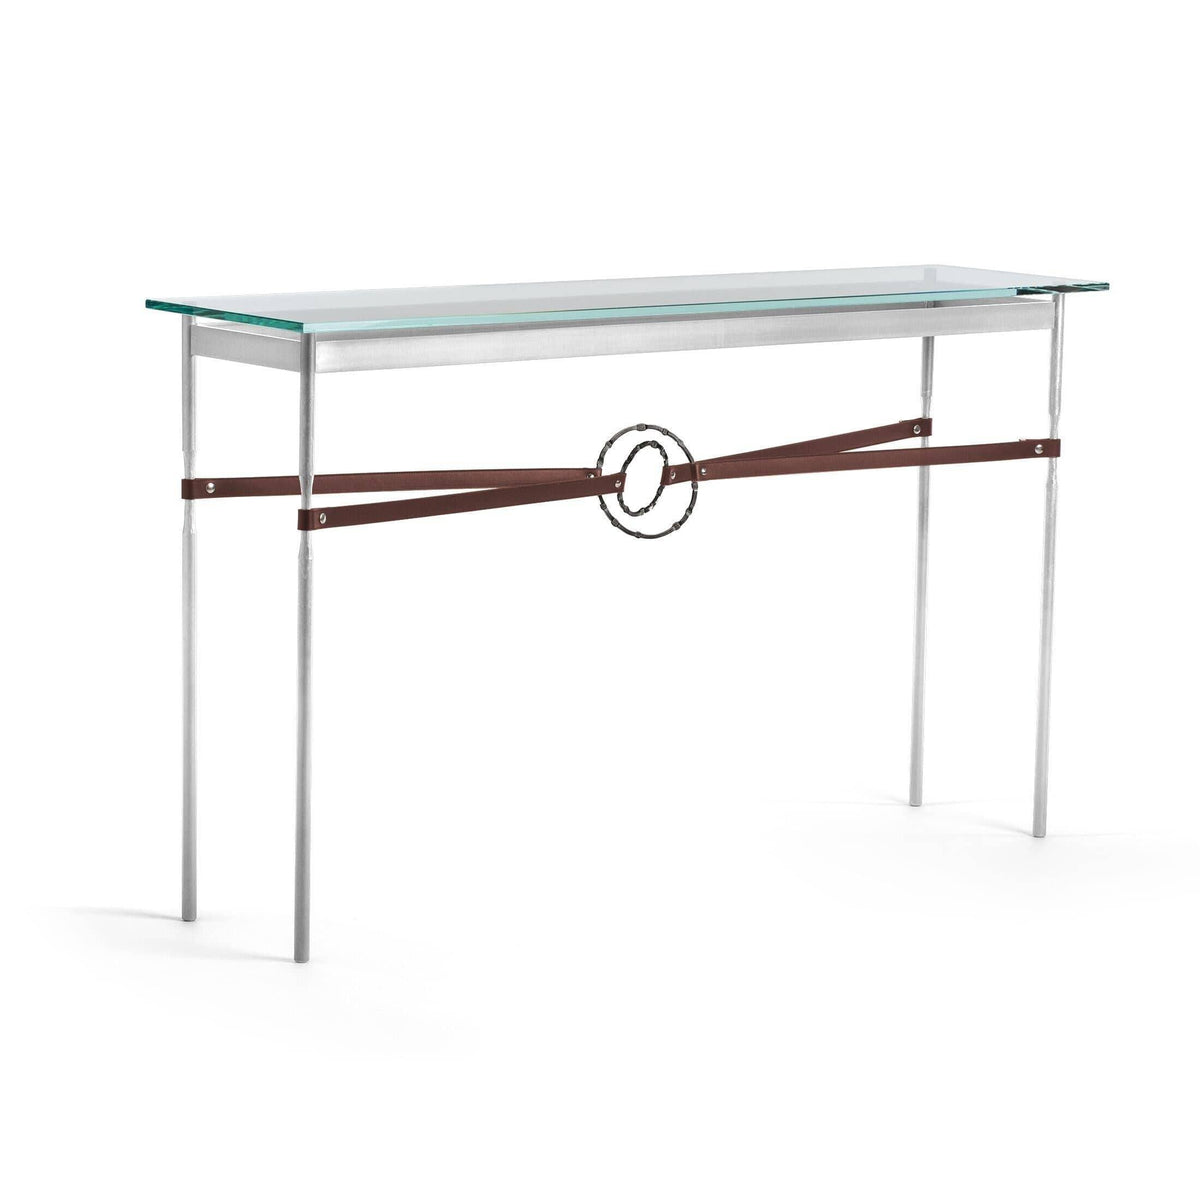 Hubbardton Forge - Equus Brown Leather Console Table - 750118-85-07-LB-VA0714 | Montreal Lighting & Hardware